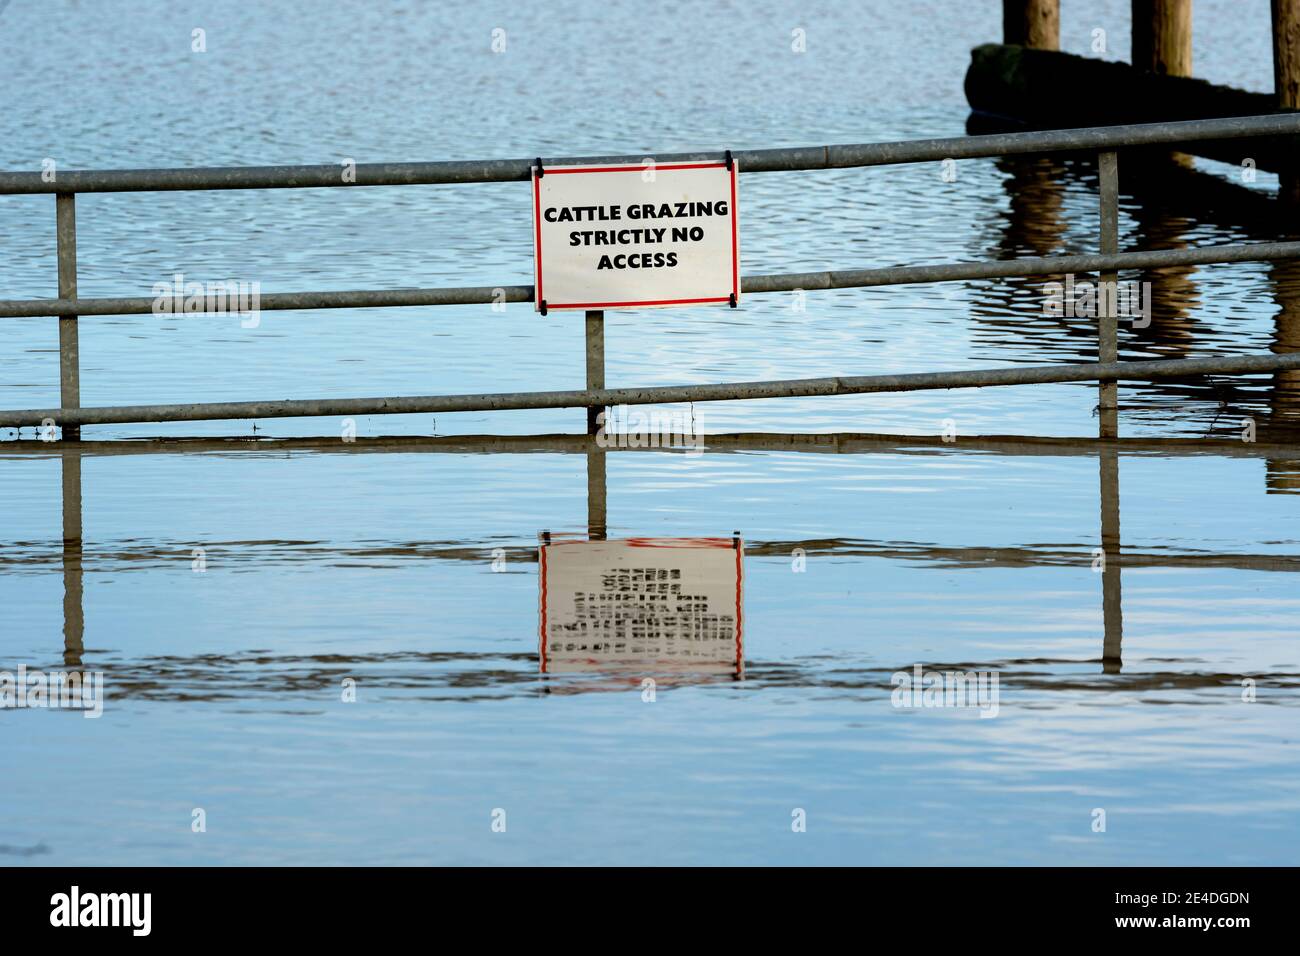 Sign on a gate in River Avon floodwater at Barford, Warwickshire, England, UK. Gennaio 2021. Foto Stock